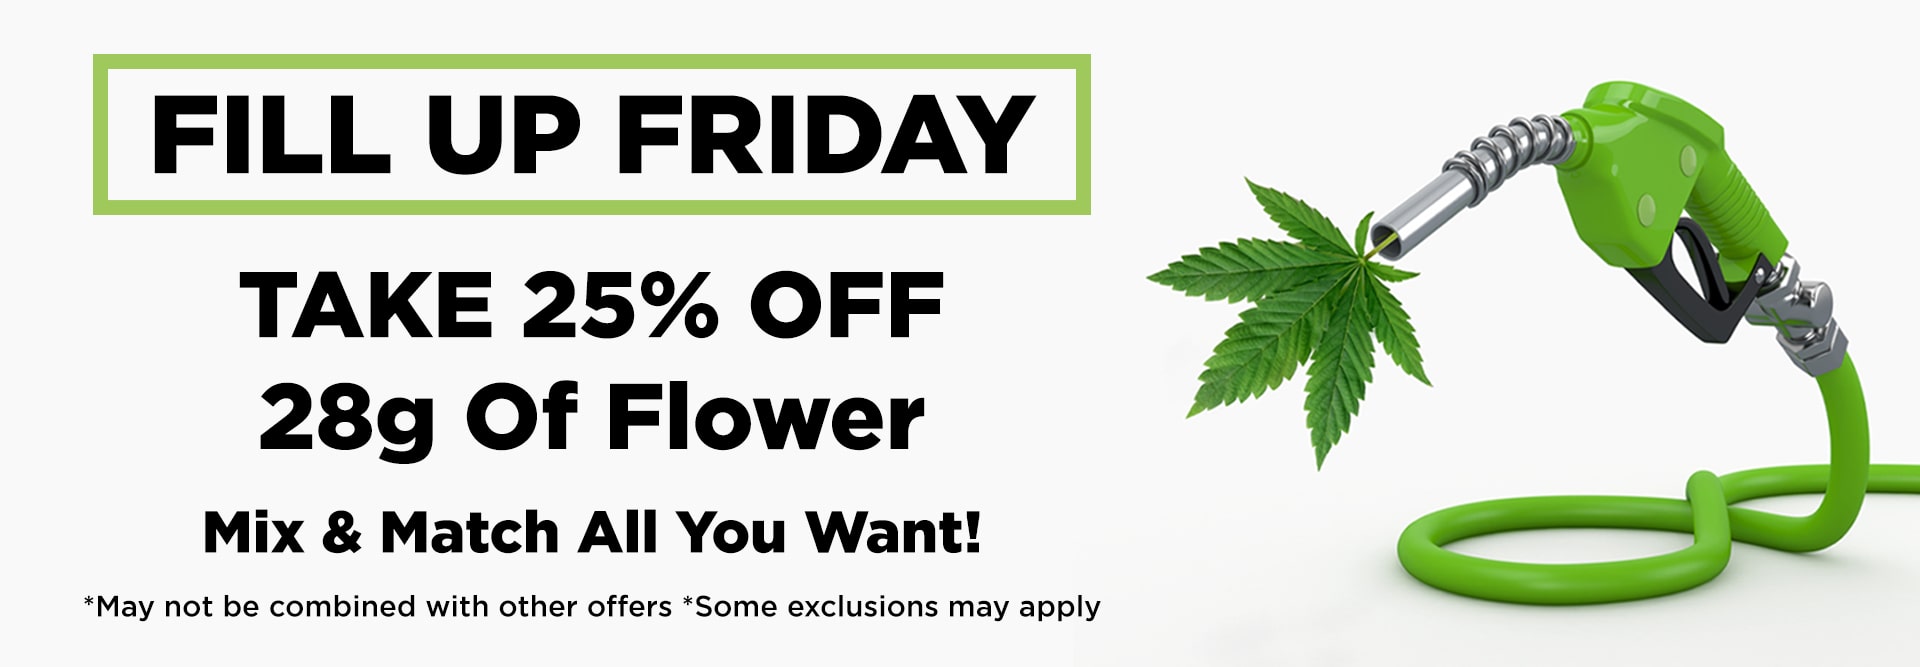 Fill Up Friday 25% Off - Same on cannabis